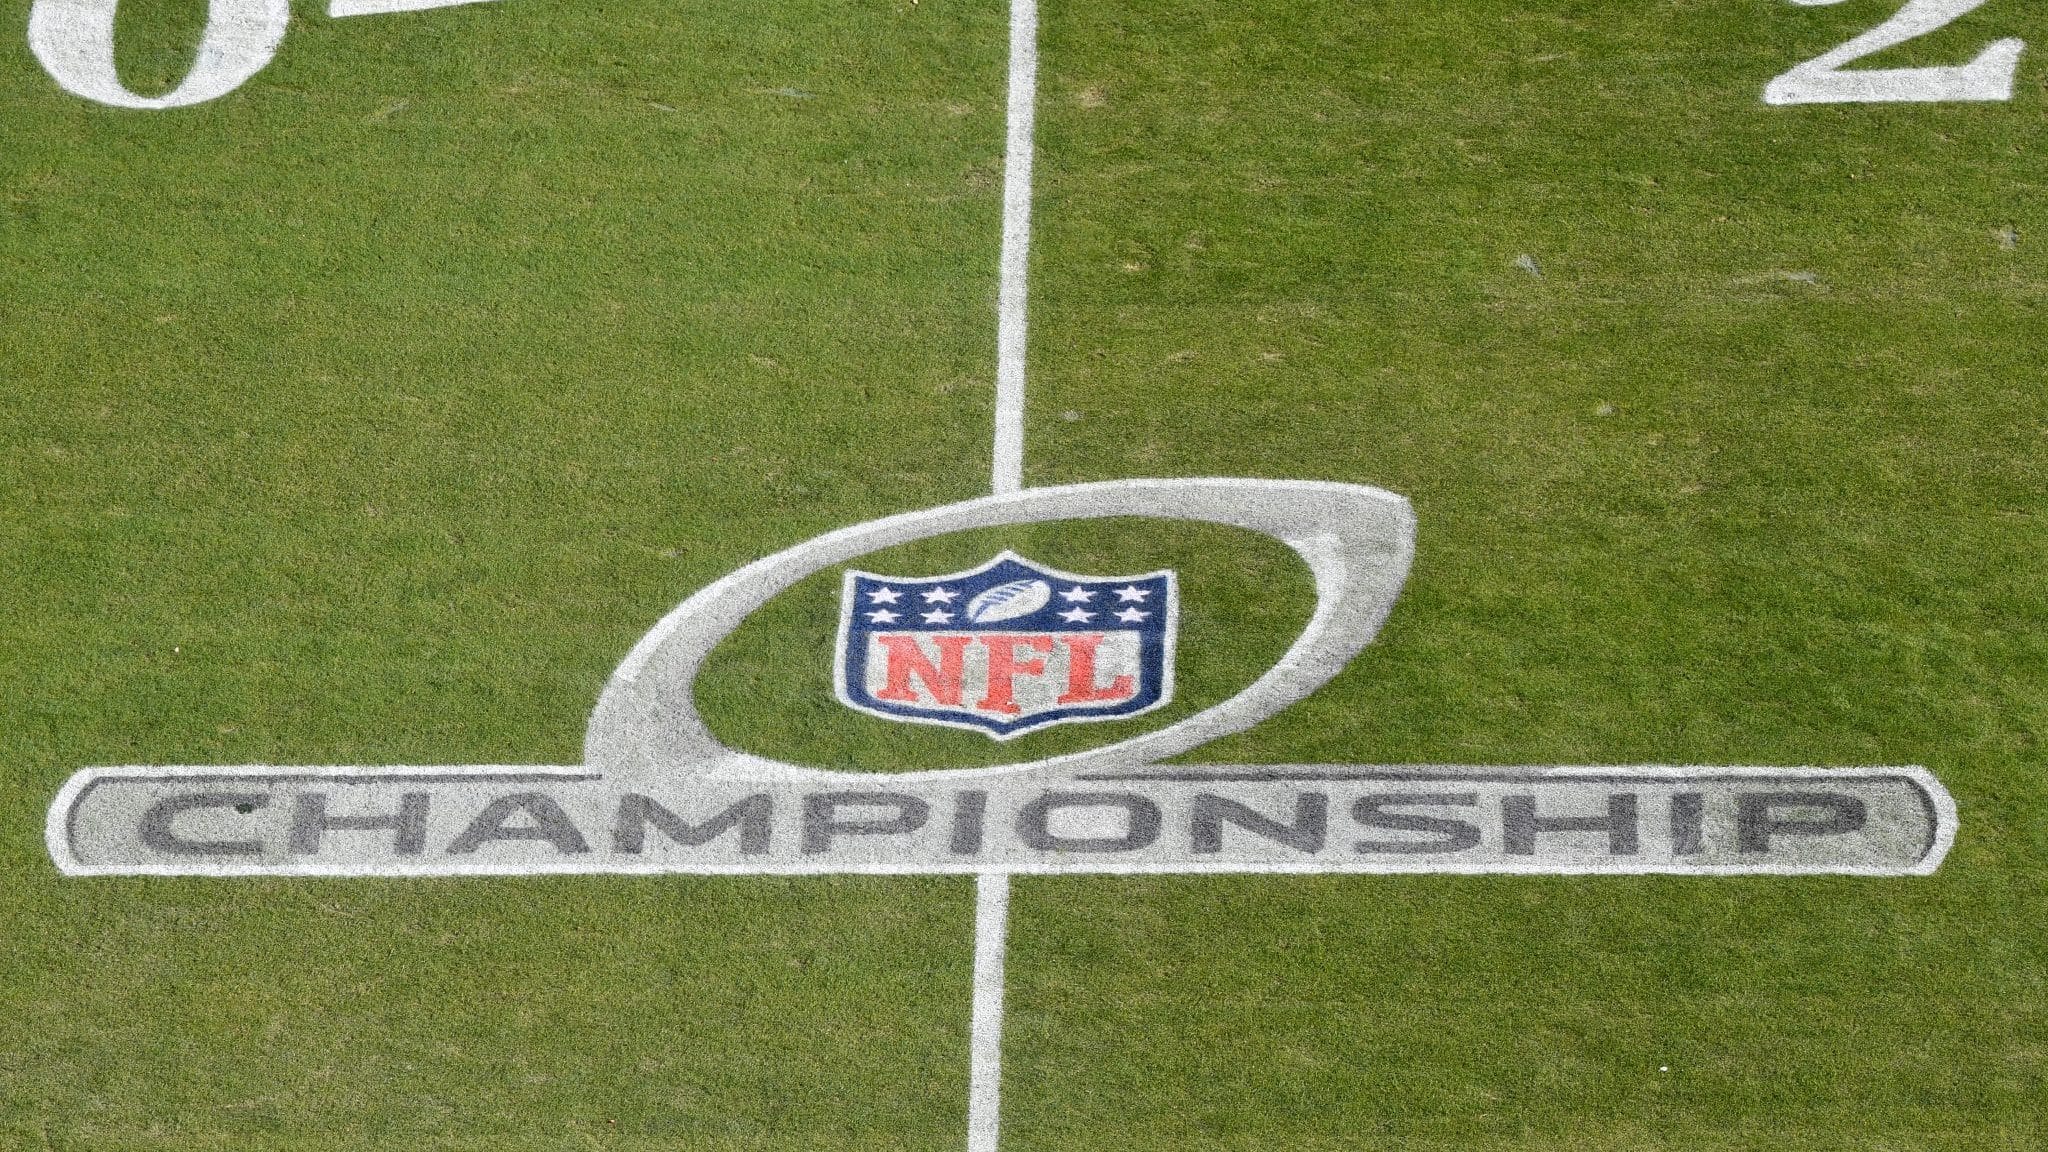 KANSAS CITY, MISSOURI - JANUARY 19: The NFL Championship logo is seen on the field before the AFC Championship Game between the Kansas City Chiefs and the Tennessee Titans at Arrowhead Stadium on January 19, 2020 in Kansas City, Missouri.